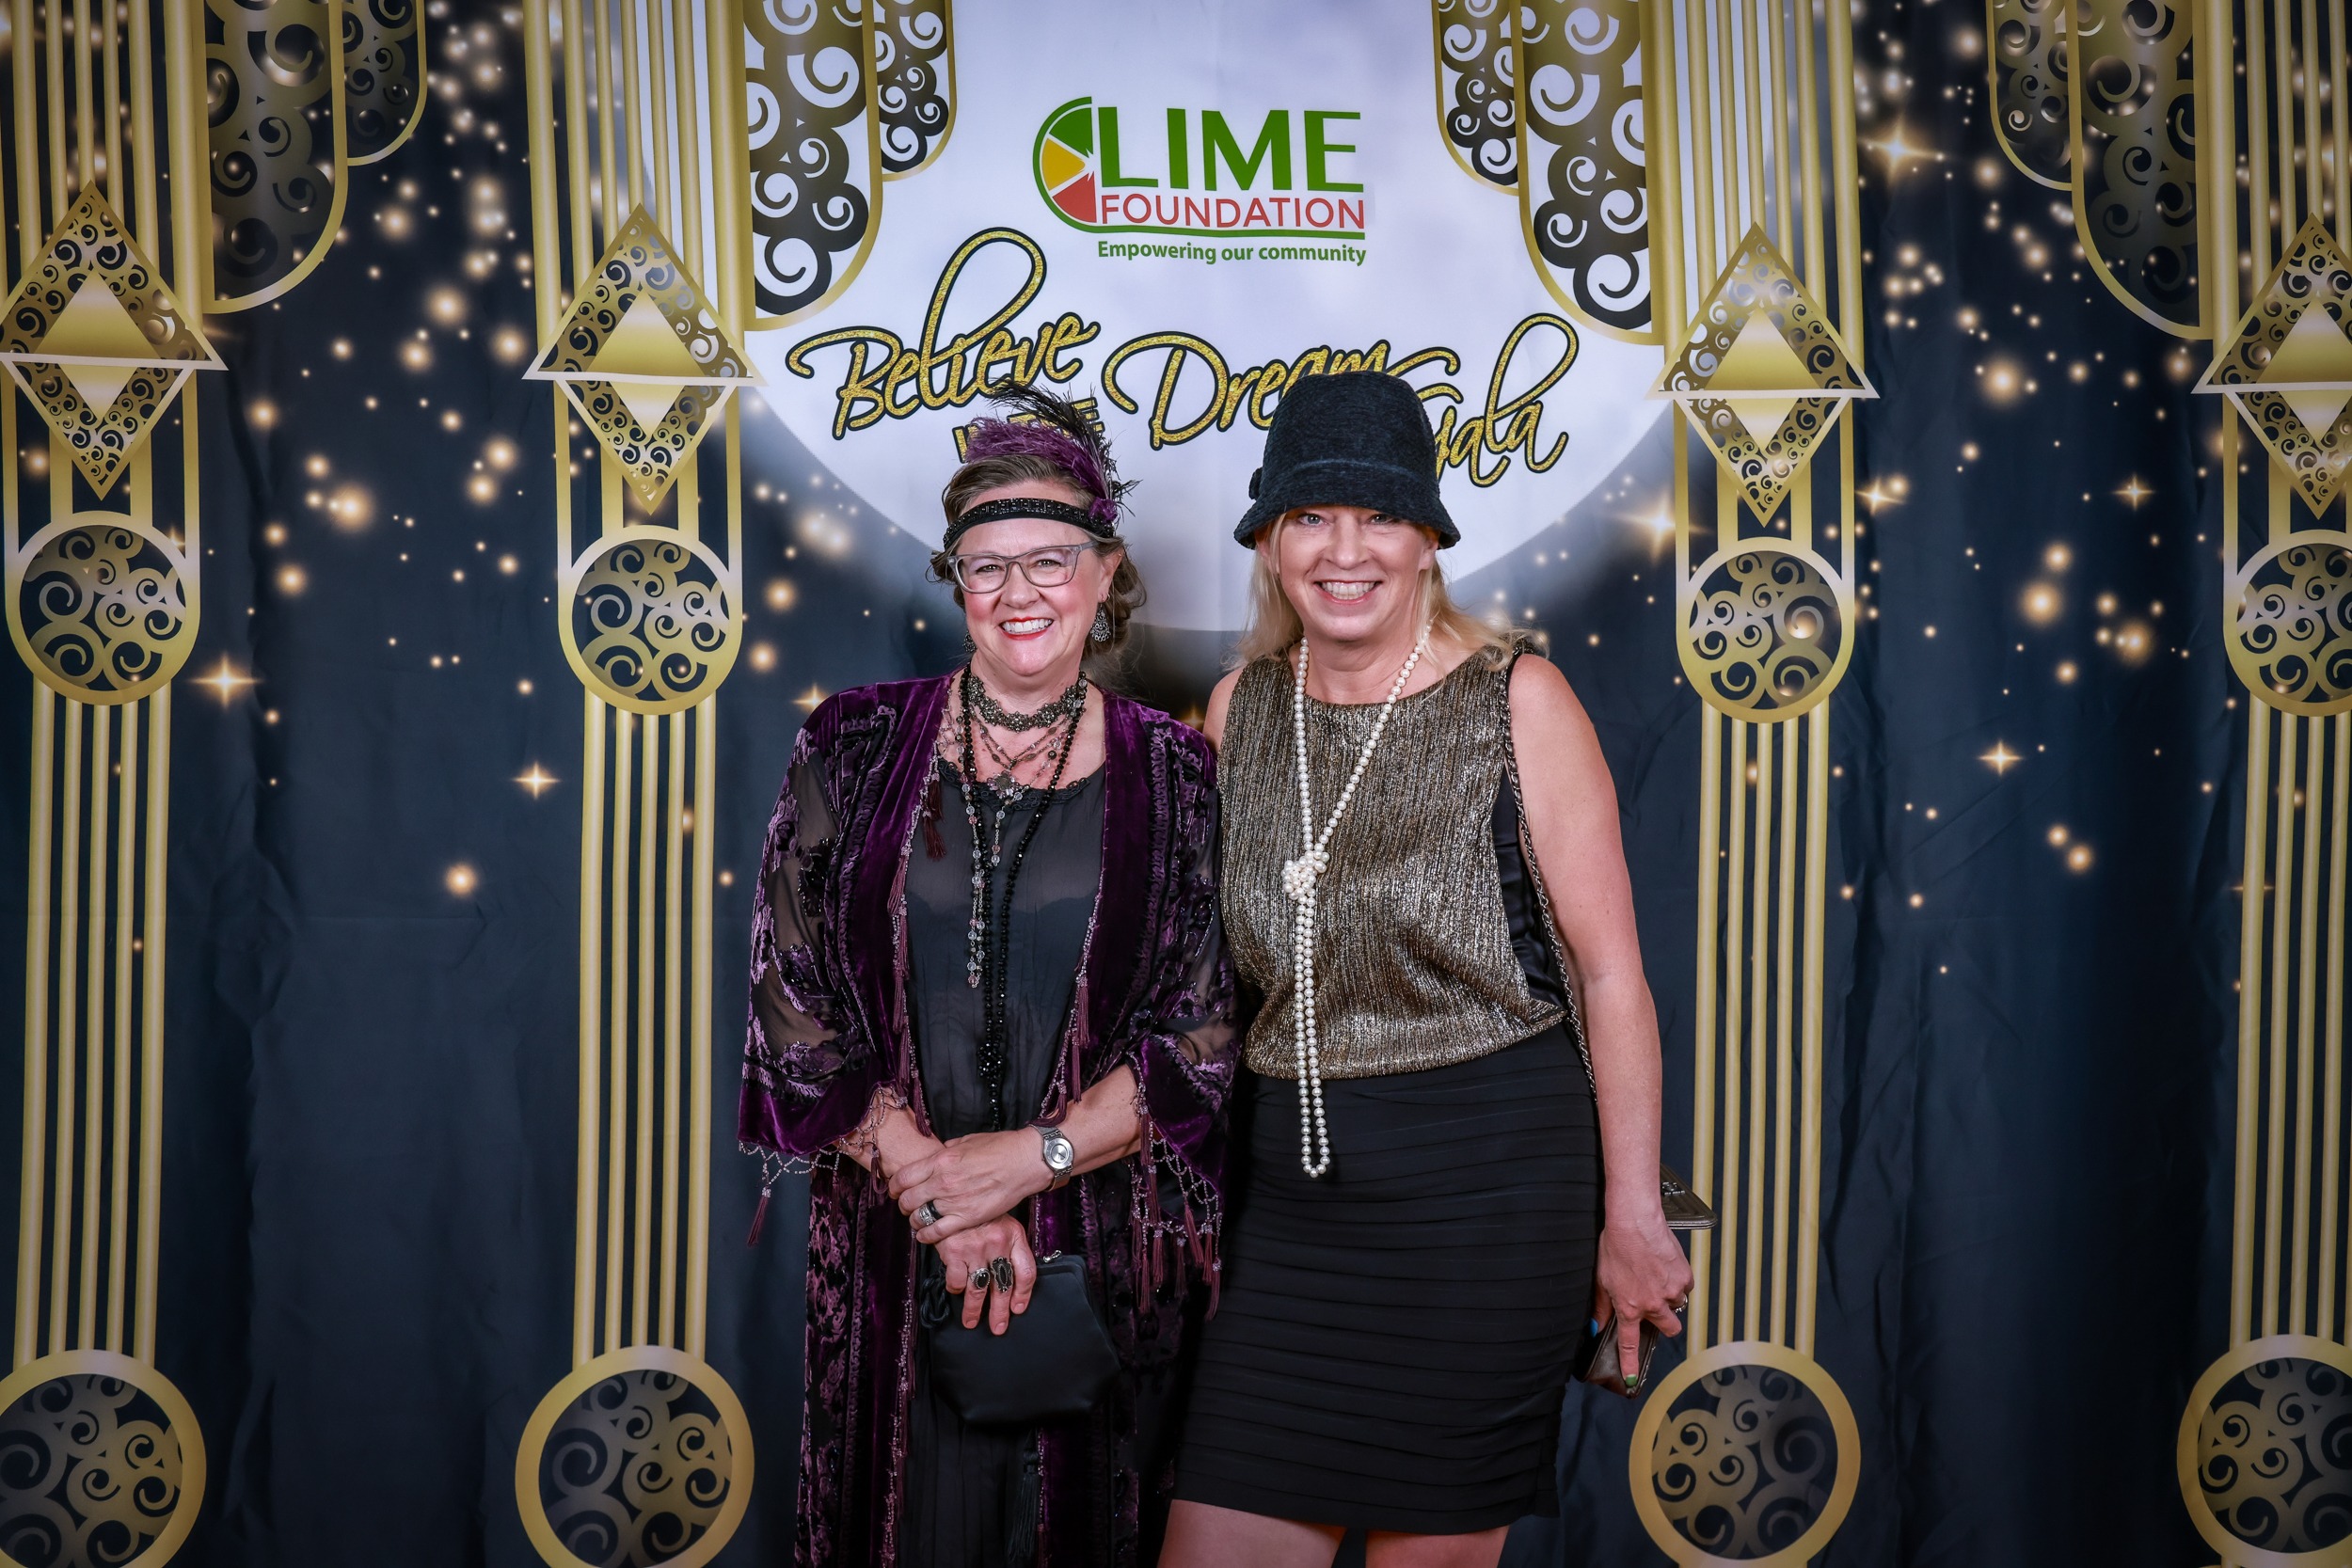 Two women posing for a photo at a Santa Rosa non-profit event organized by The LIME Foundation.